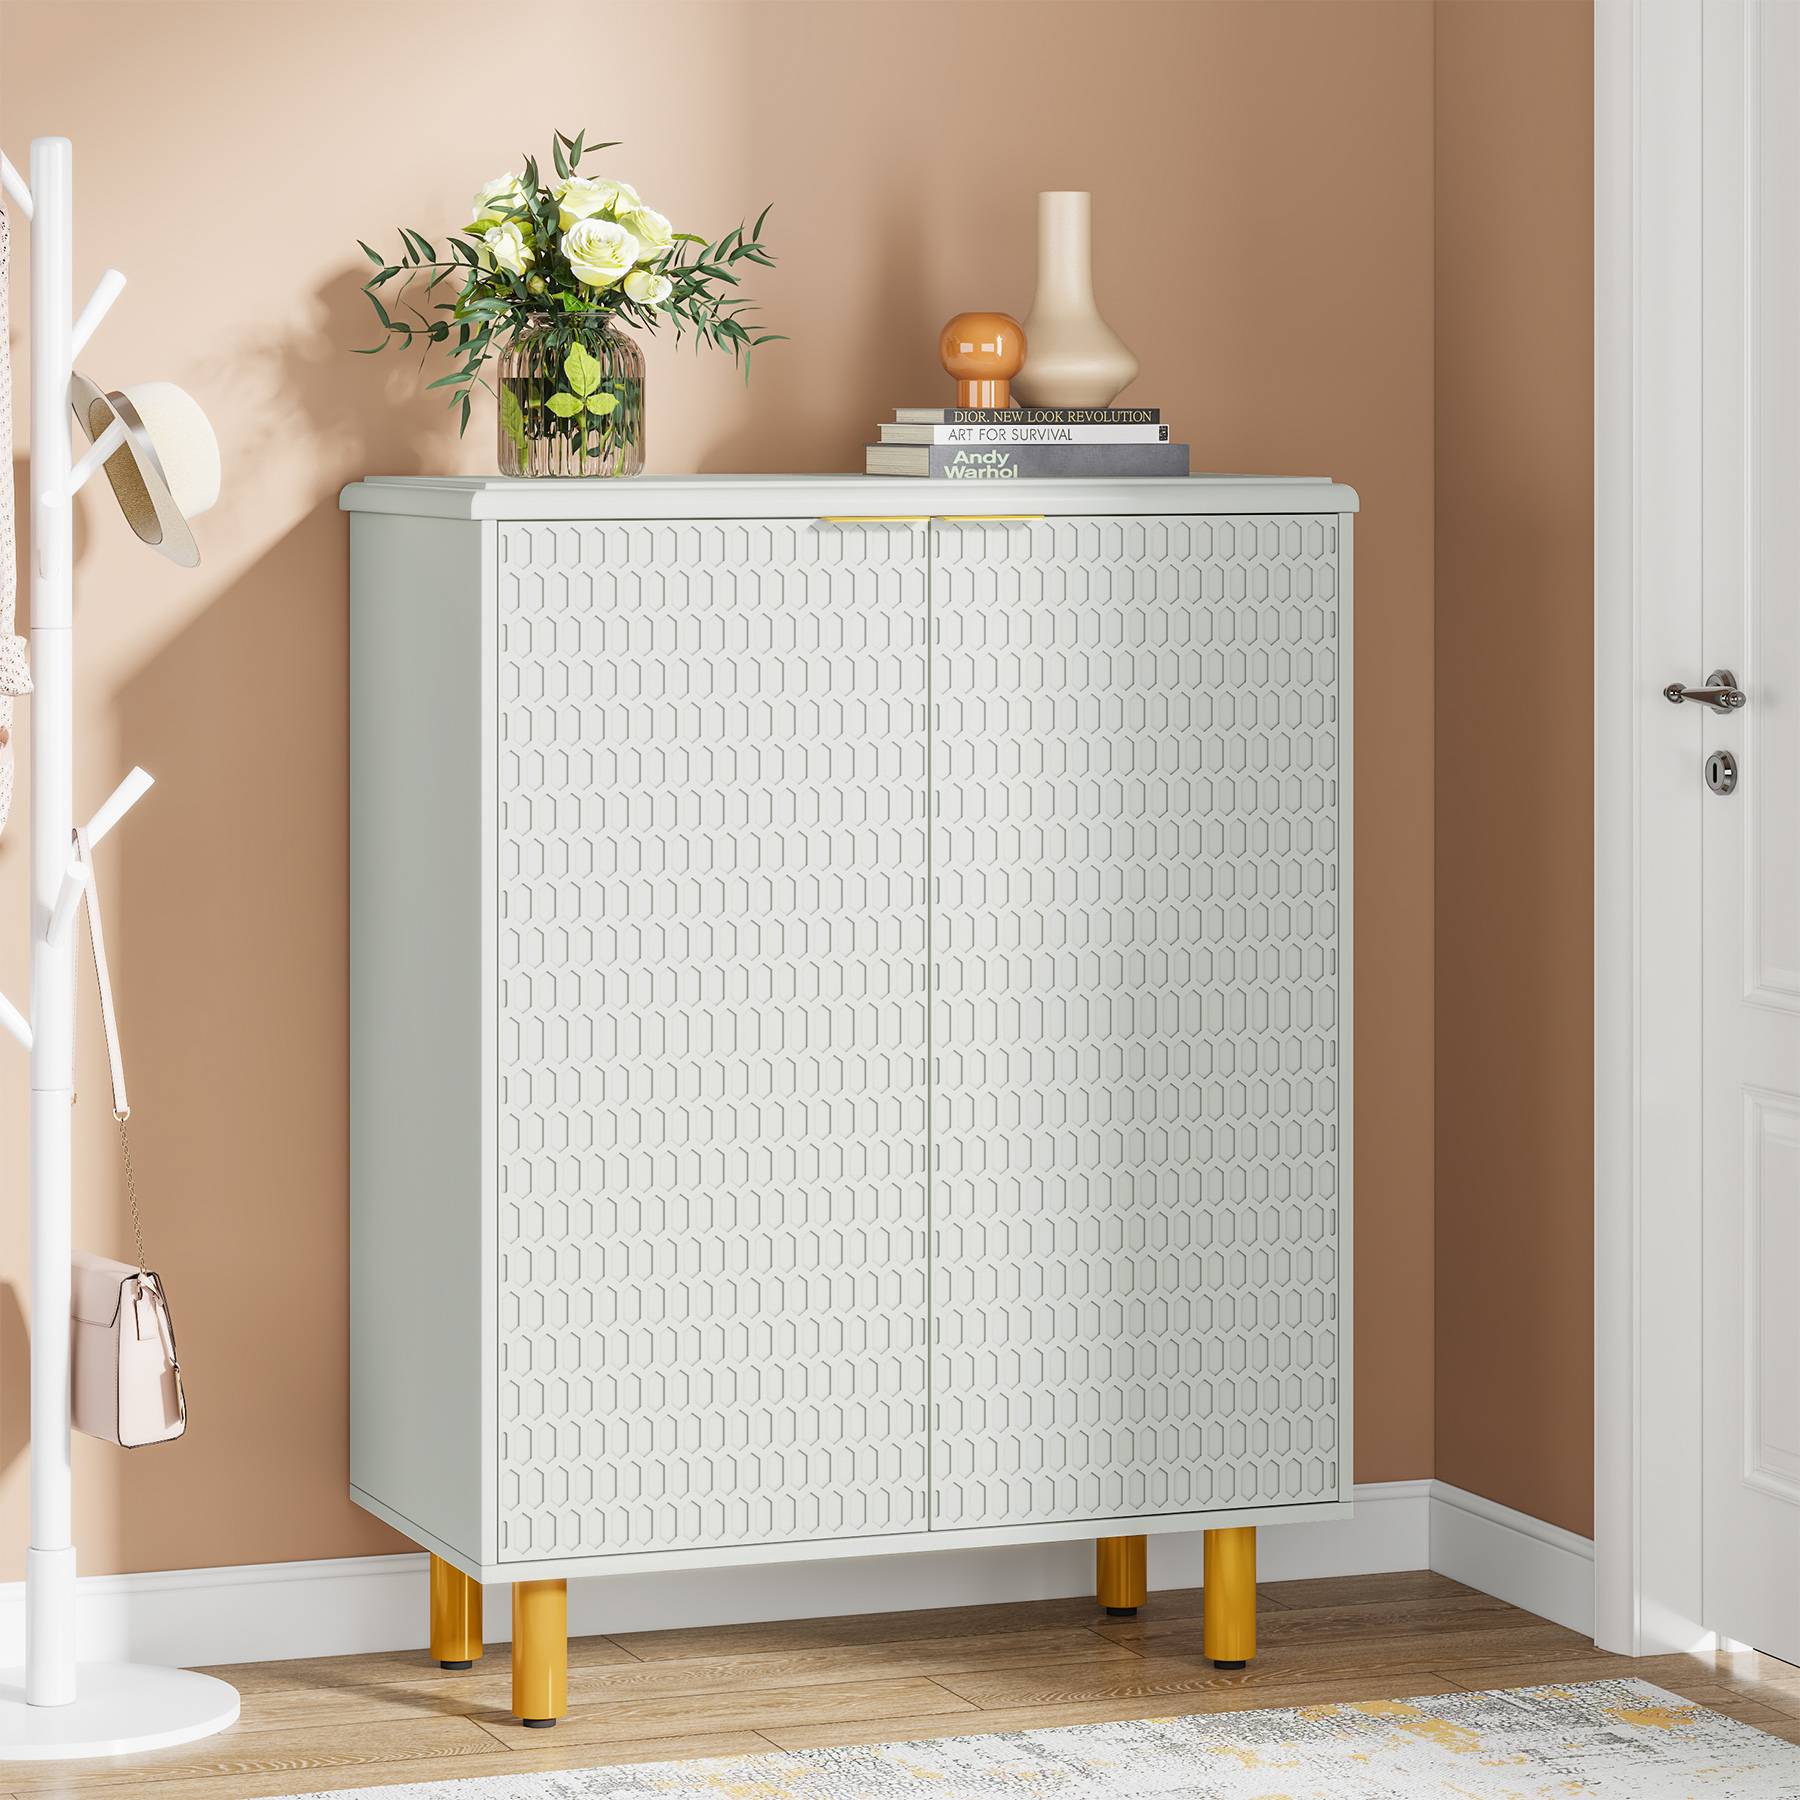 Tribesigns White MDF Shoe Cabinet with 3 Tiers and Adjustable